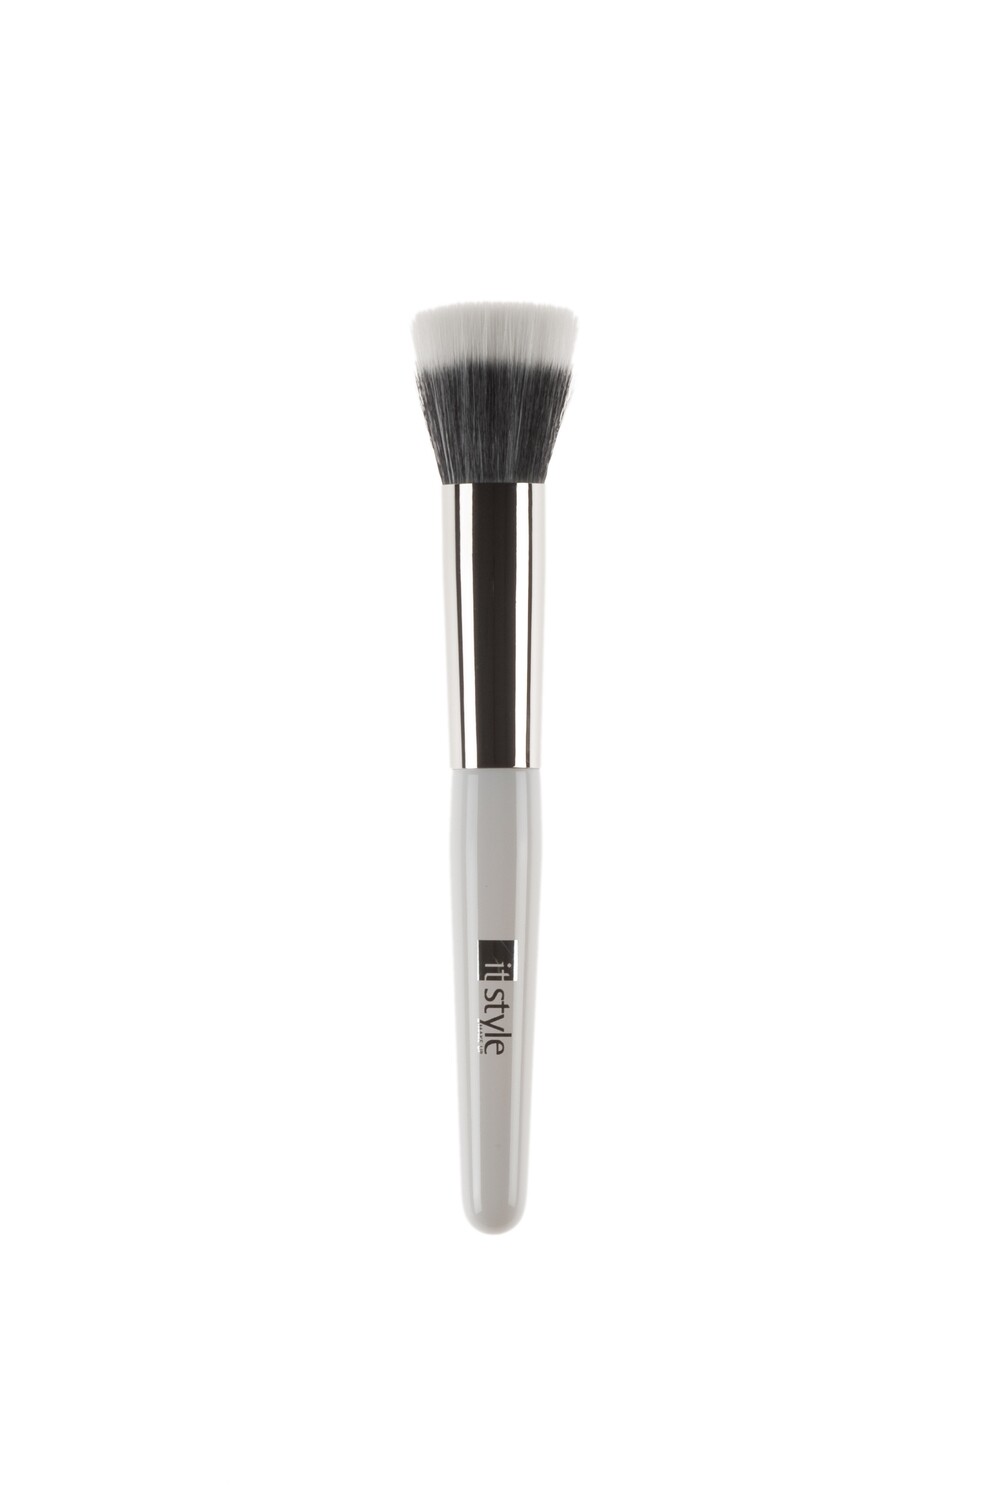 SYNTHETIC ROUND FOUNDATION BRUSH TWO FIBERS PE37